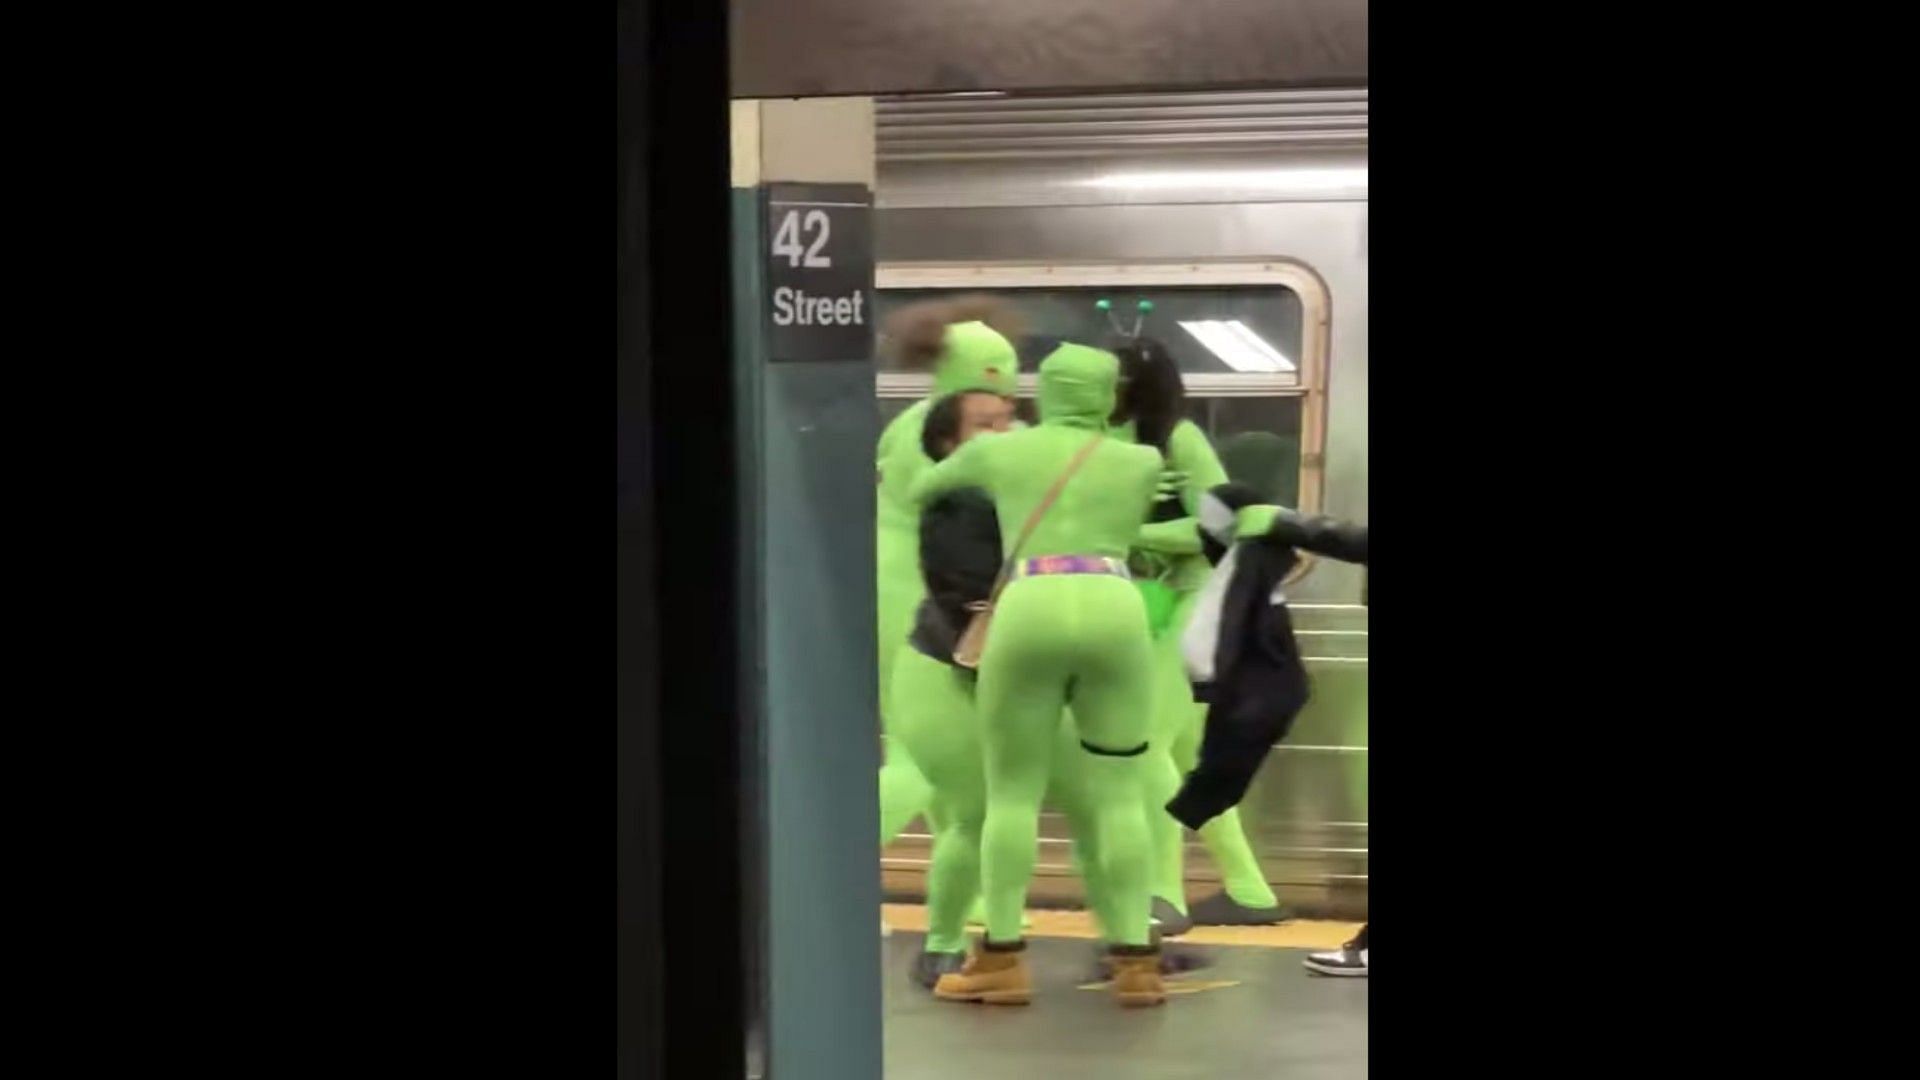 Two young girls were by women wearing neon green leotards in the New York City Subway (Image via Youtube)